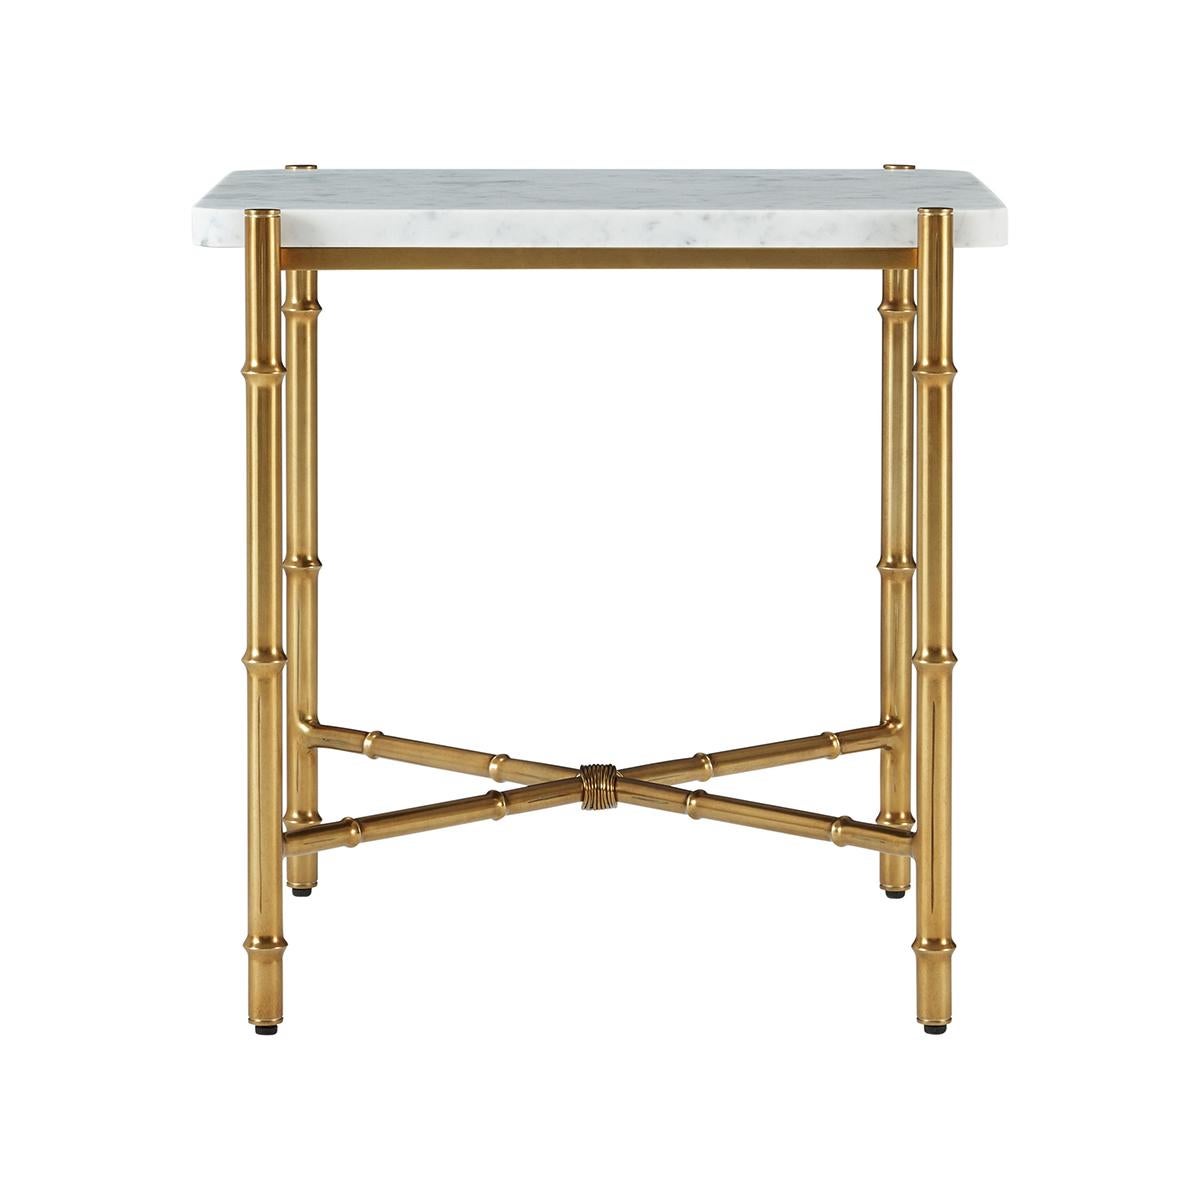 Slender lines form a light and airy design in the modern Side Table. A graceful combination of honed white bianco marble atop an organic faux bois base in a satin bronze finish.

Dimensions: 22